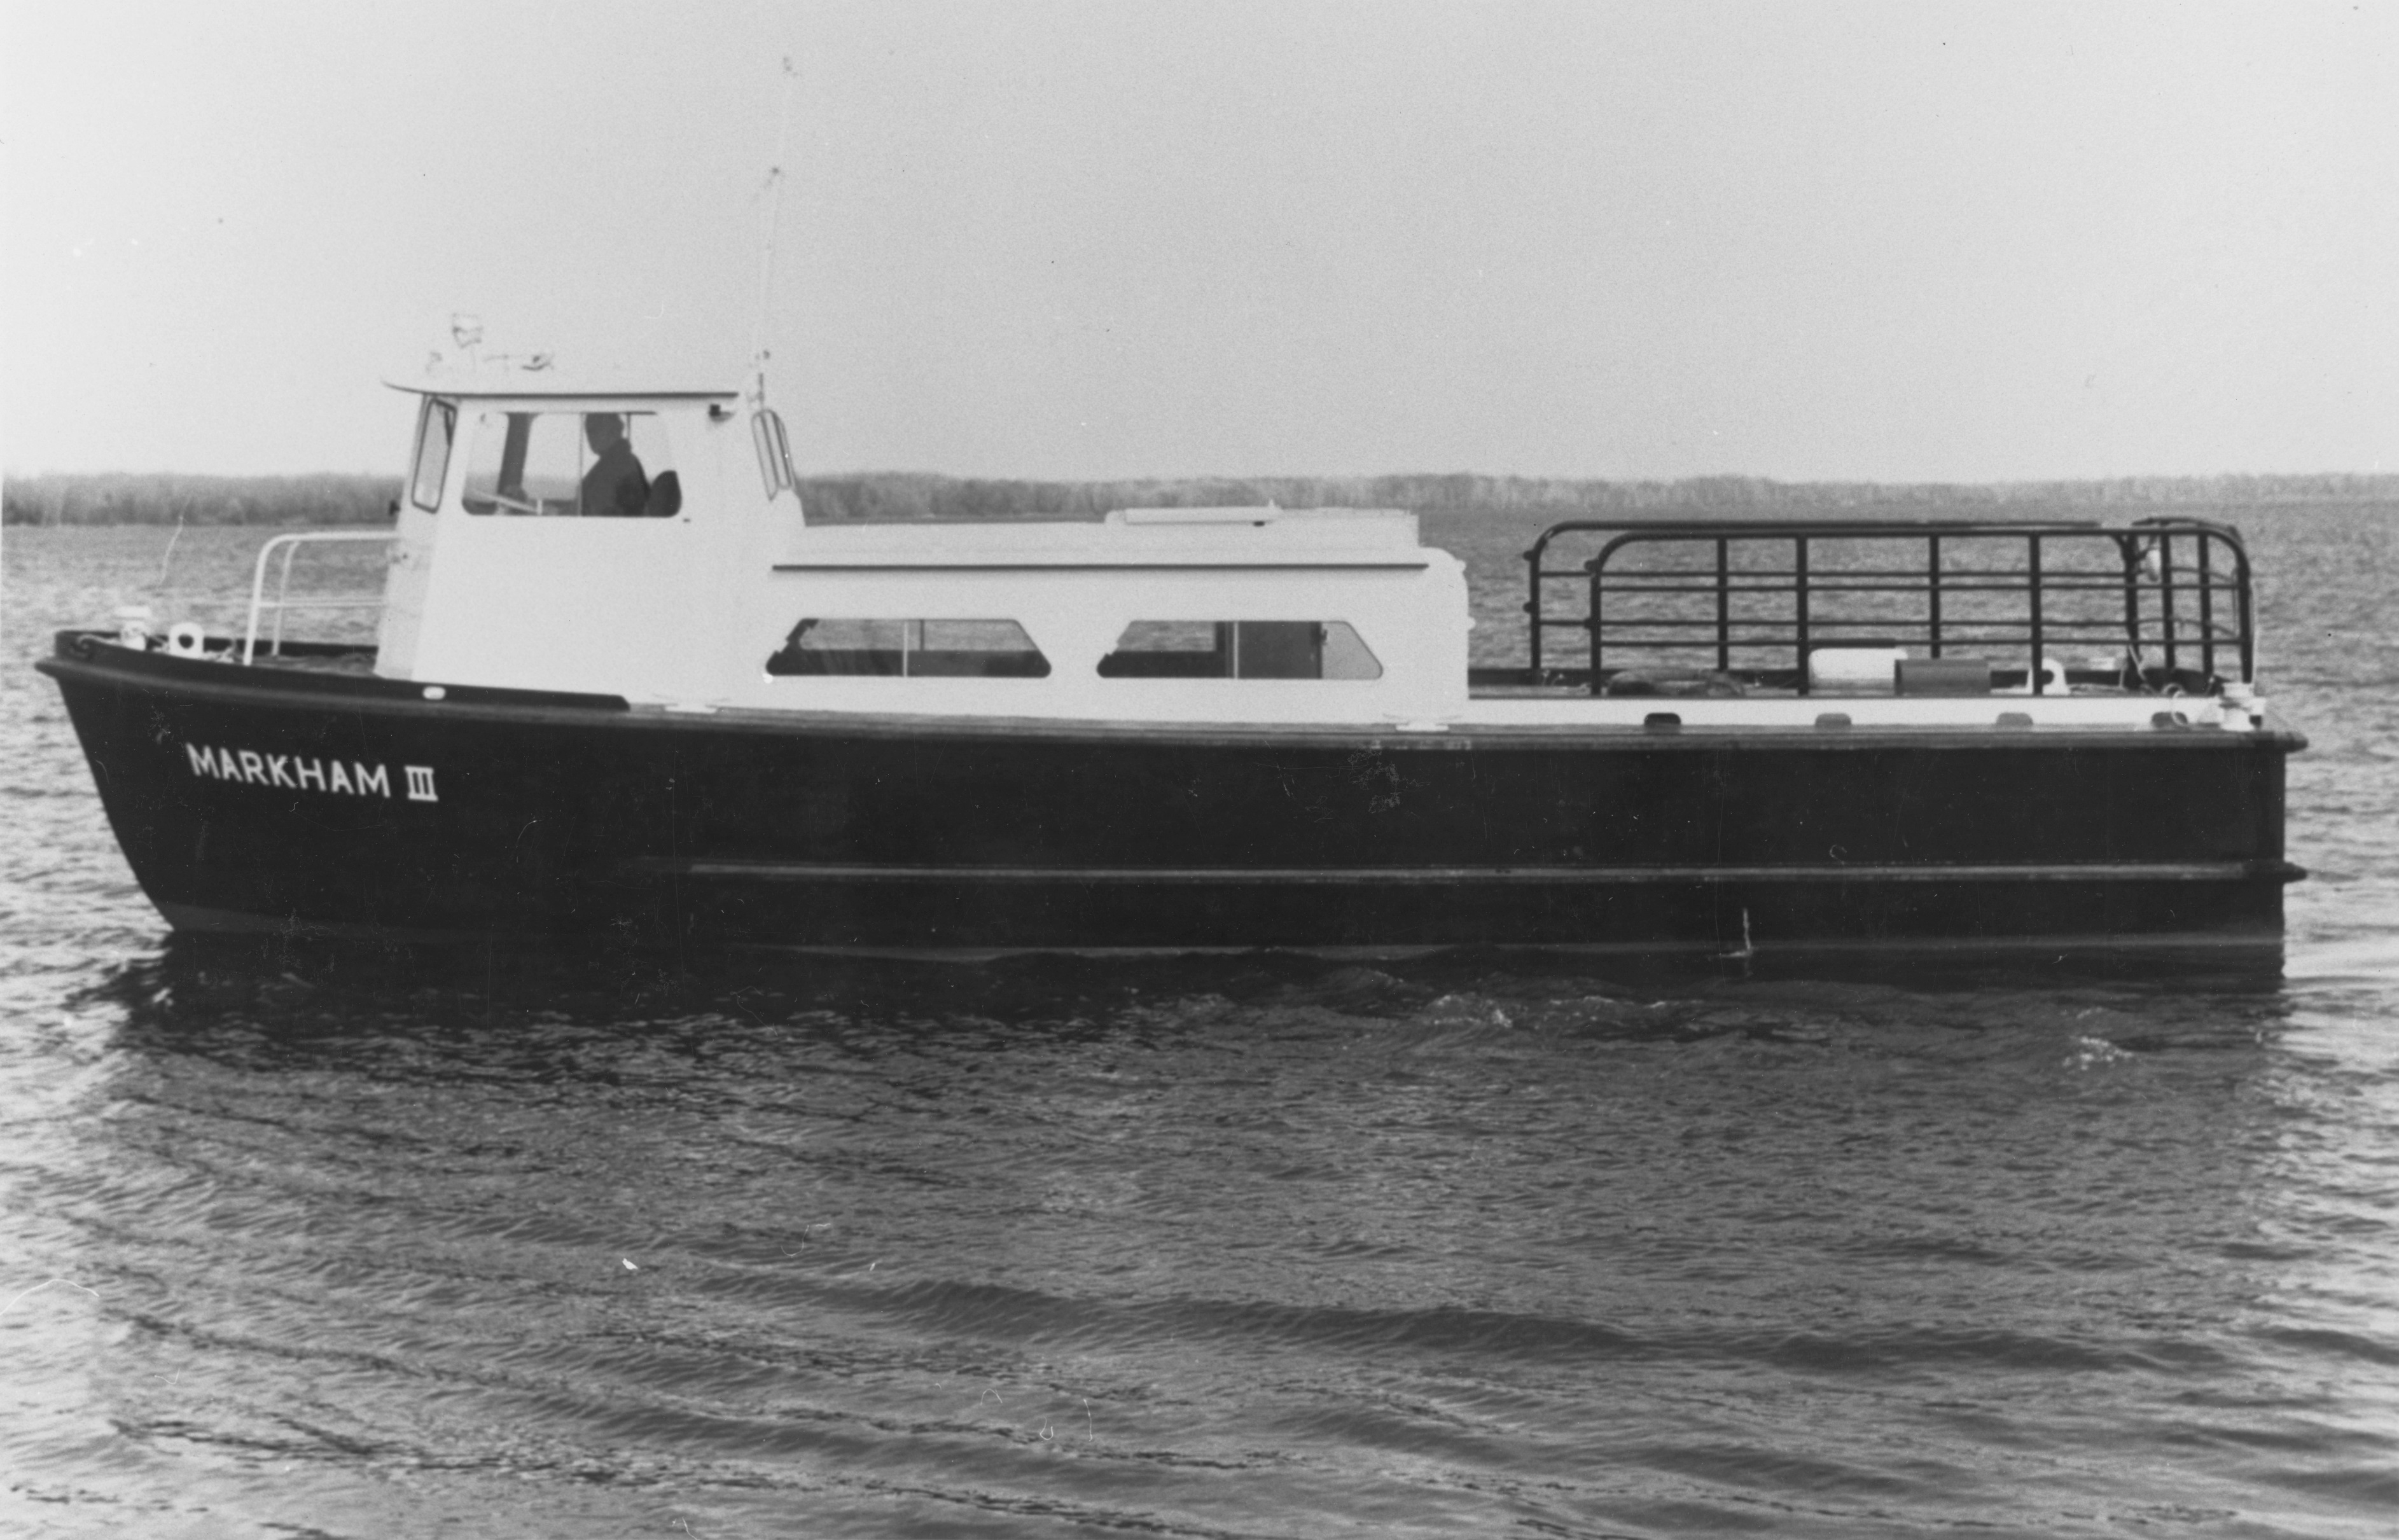 Black & white photo of a black & white boat facing left. It says "MARKHAM III" in white on its bow.